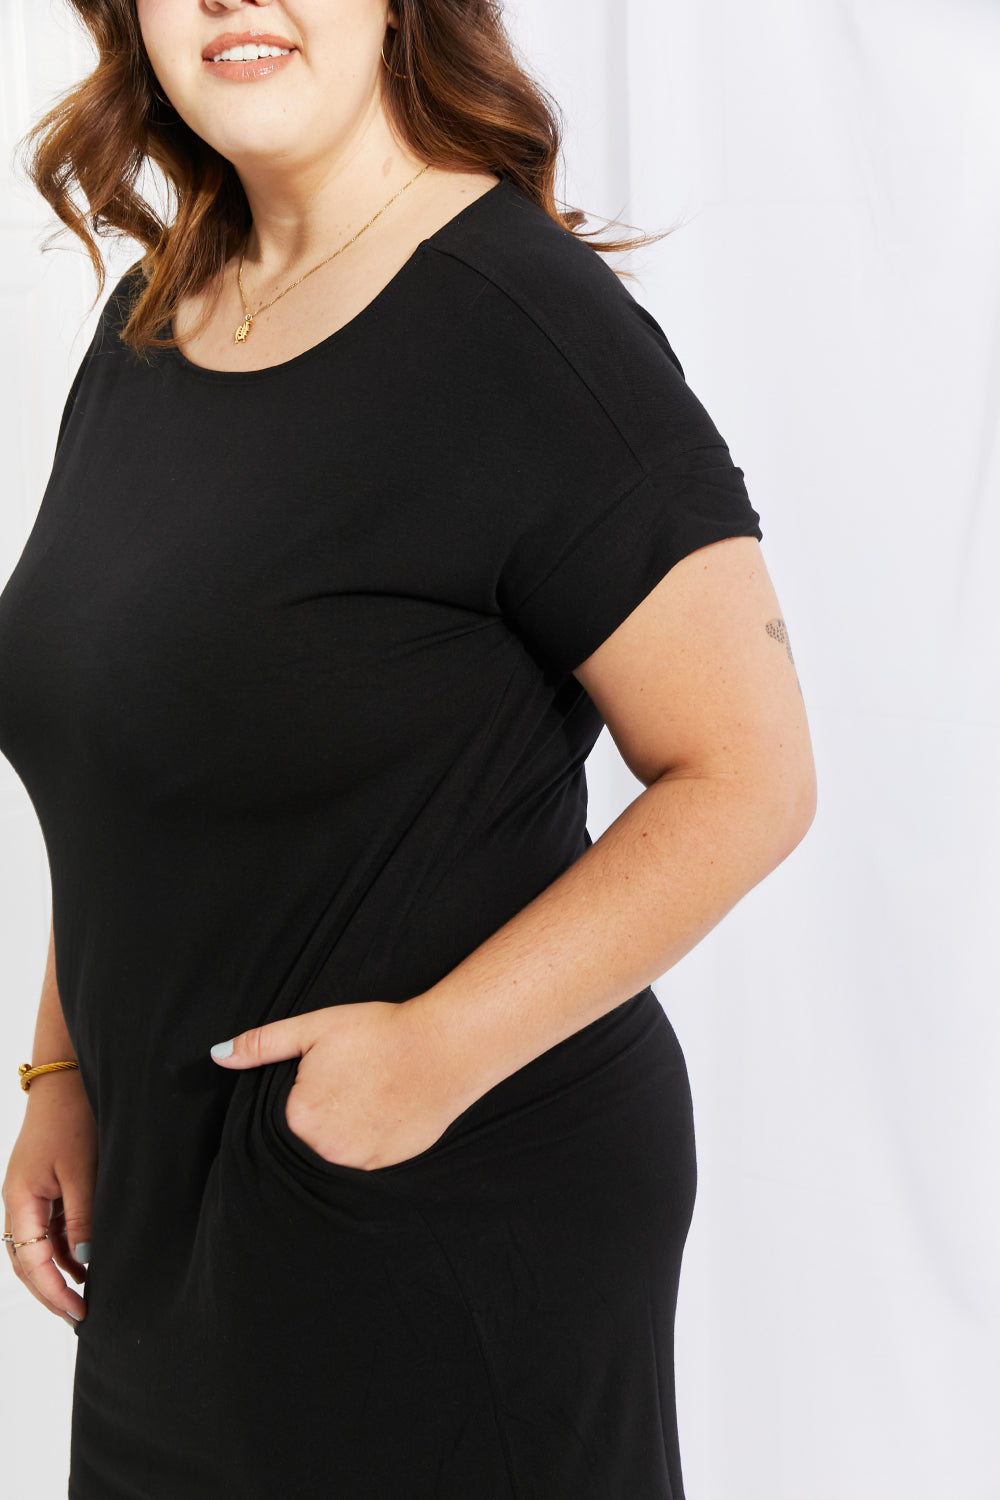 The Comfy Little Black Dress with Pockets